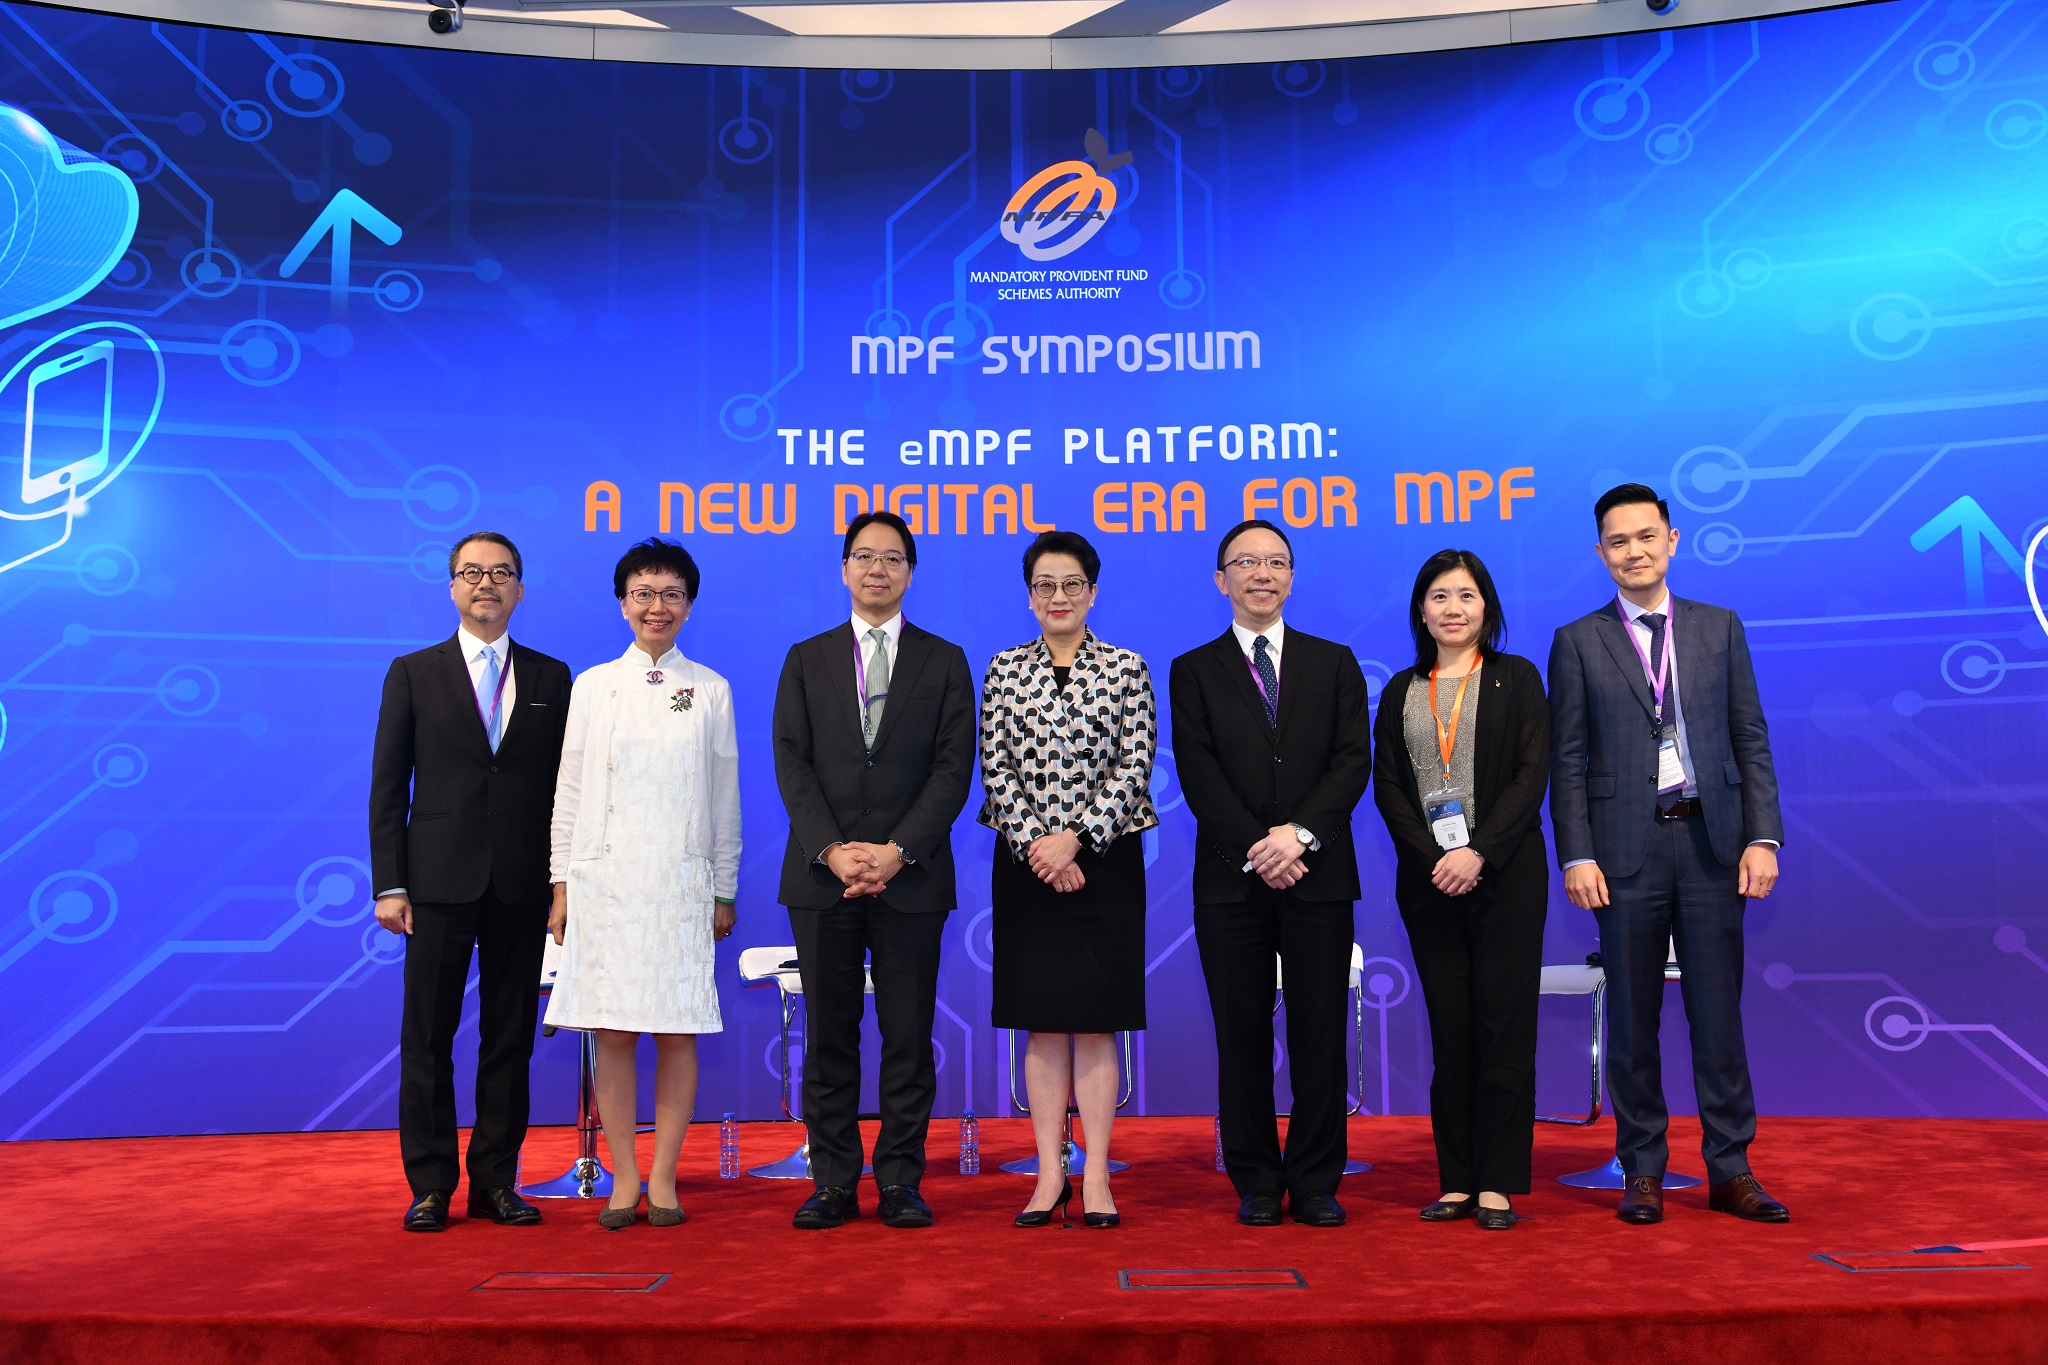 Mr. Victor Lam, Government Chief Information Officer (third right), Ms. Alice Law, Deputy Chairman and Managing Director, MPFA (centre), Hon. Charles Mok, Legislative Councillor (third left), Ms. Cynthia Hui, Executive Director (Members), MPFA (second right), Ms. Lau Ka-shi, Vice-Chairman, Hong Kong Trustees’ Association (second left), Mr. Joel Lim, Partner, Financial Services Advisory, Digital Technology Leader, Ernst & Young (first right) and Mr. KP Luk, Chairman, Pension Schemes Association (first left) at the “MPF Symposium “The eMPF Platform: A new digital era for MPF””.